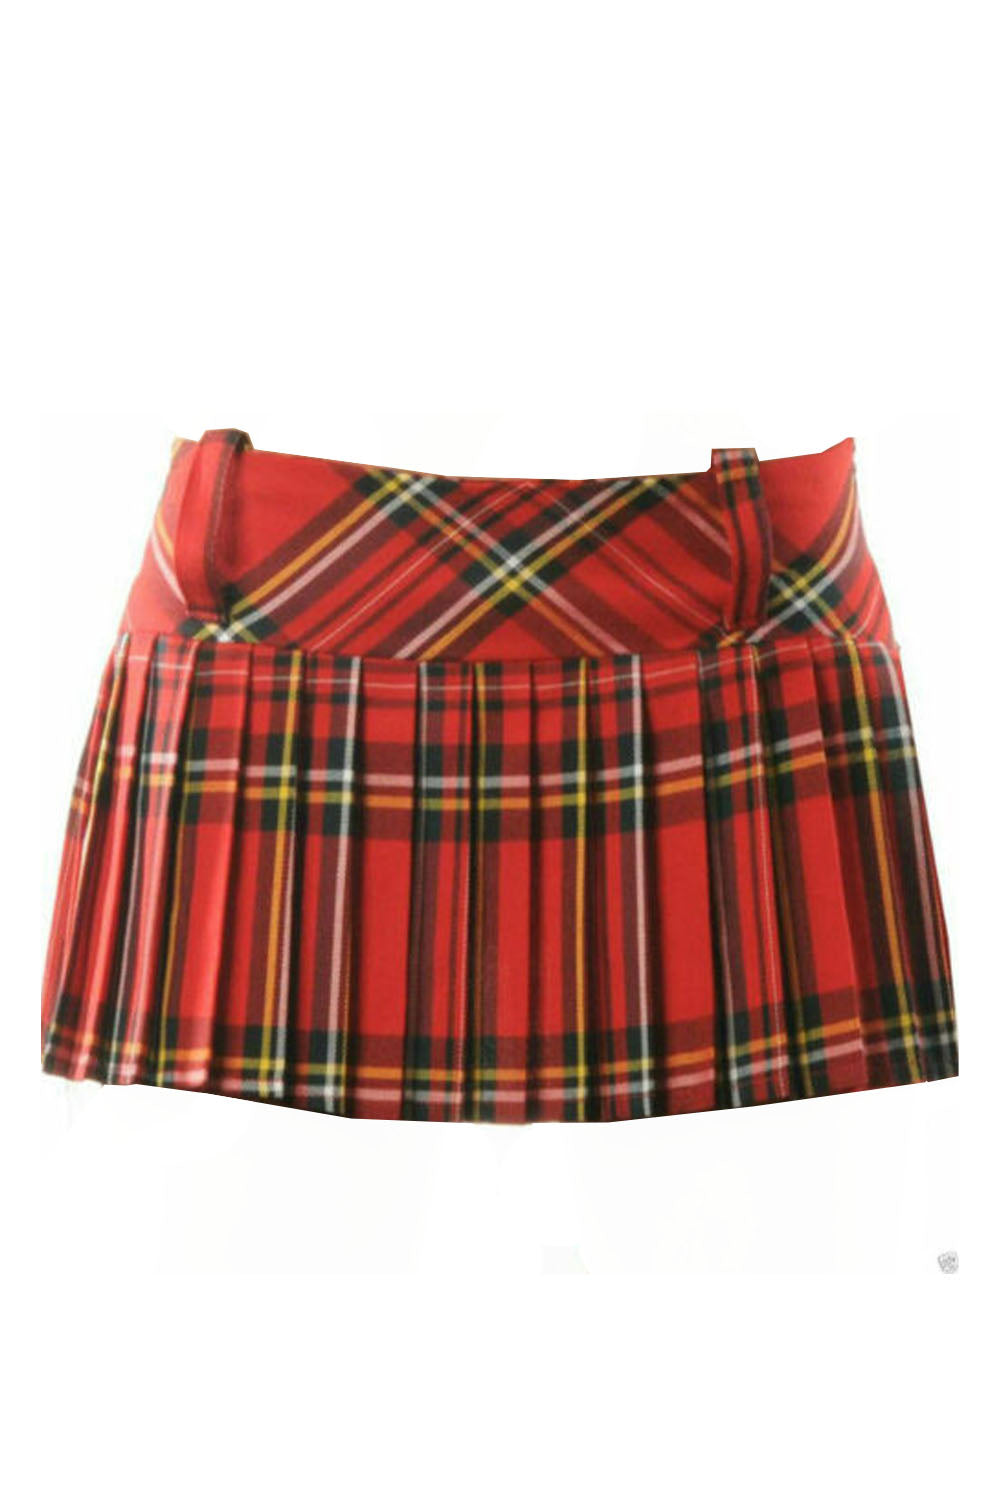 Crazy Chick Pleated Tartan Skirt (9 Inches)